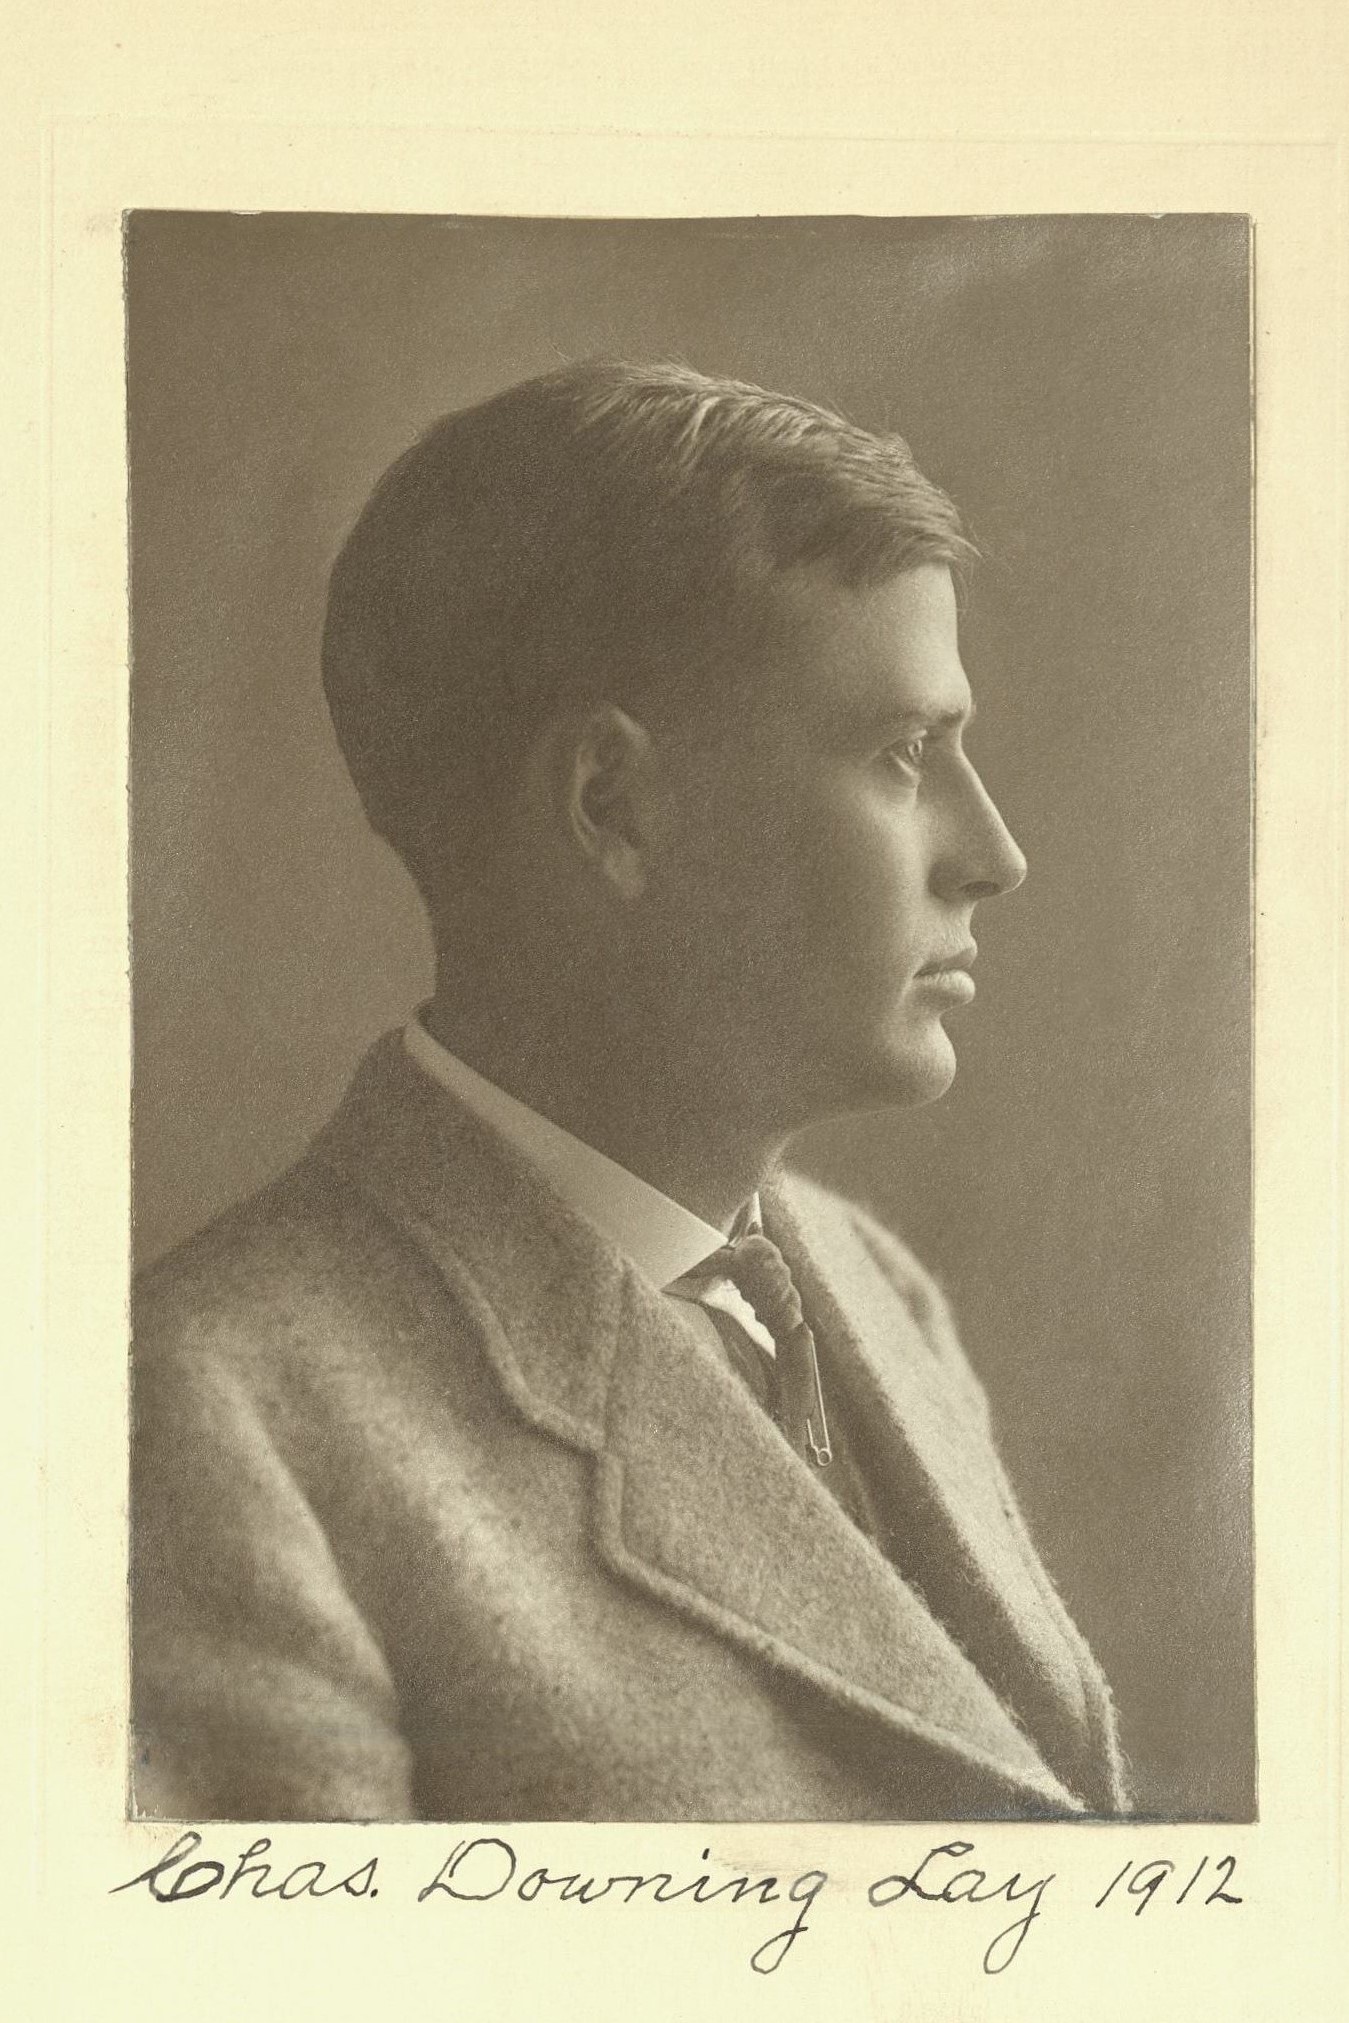 Member portrait of Charles Downing Lay